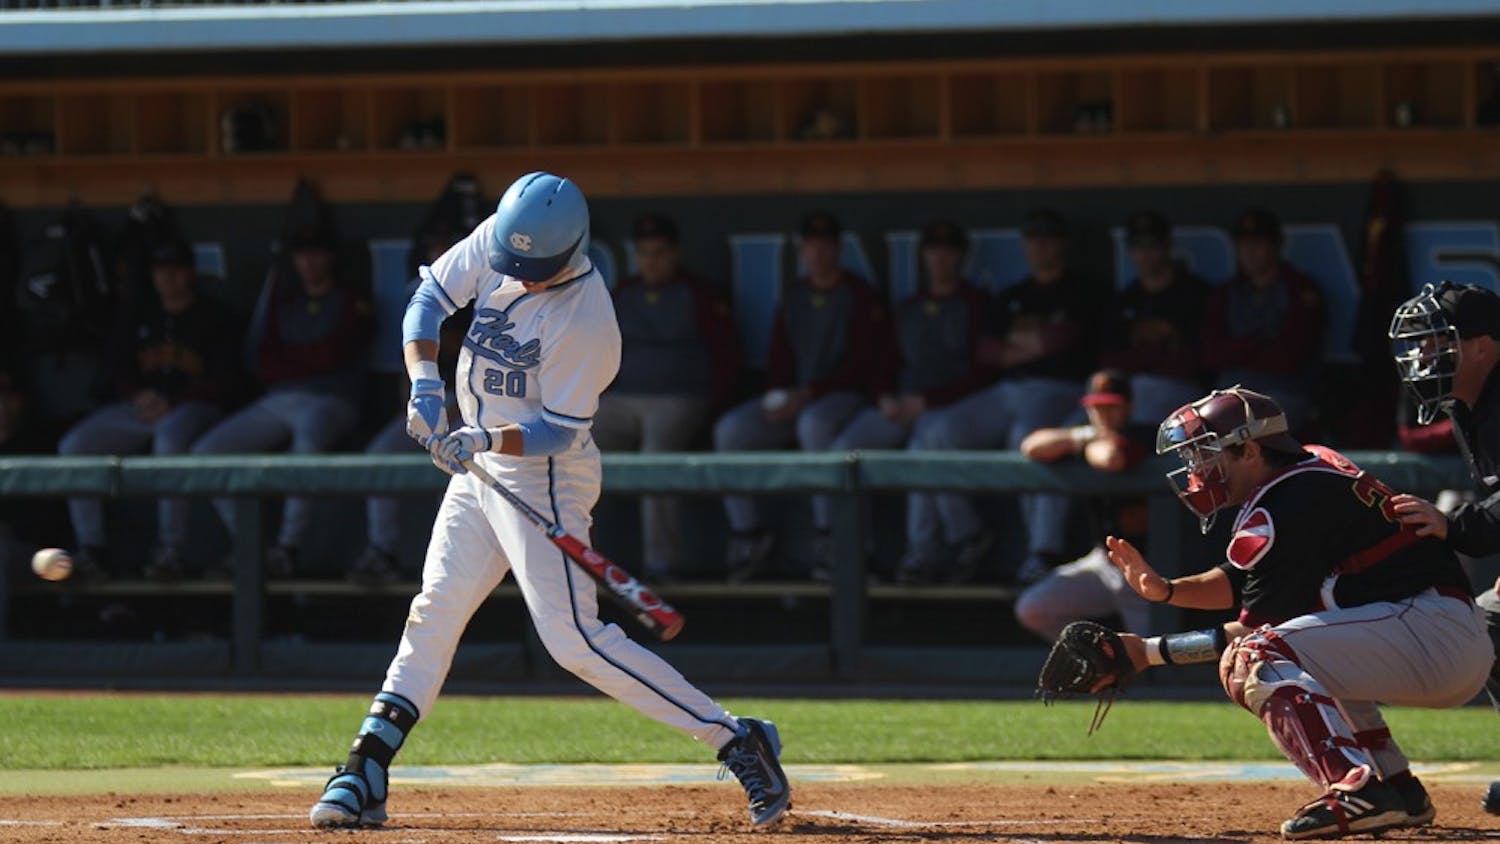 The UNC baseball team faced off against Winthrop on March 26, 2014 at Boshamer Stadium in Chapel Hill, NC. Winthrop emerged victorious by a score of 3-1. 